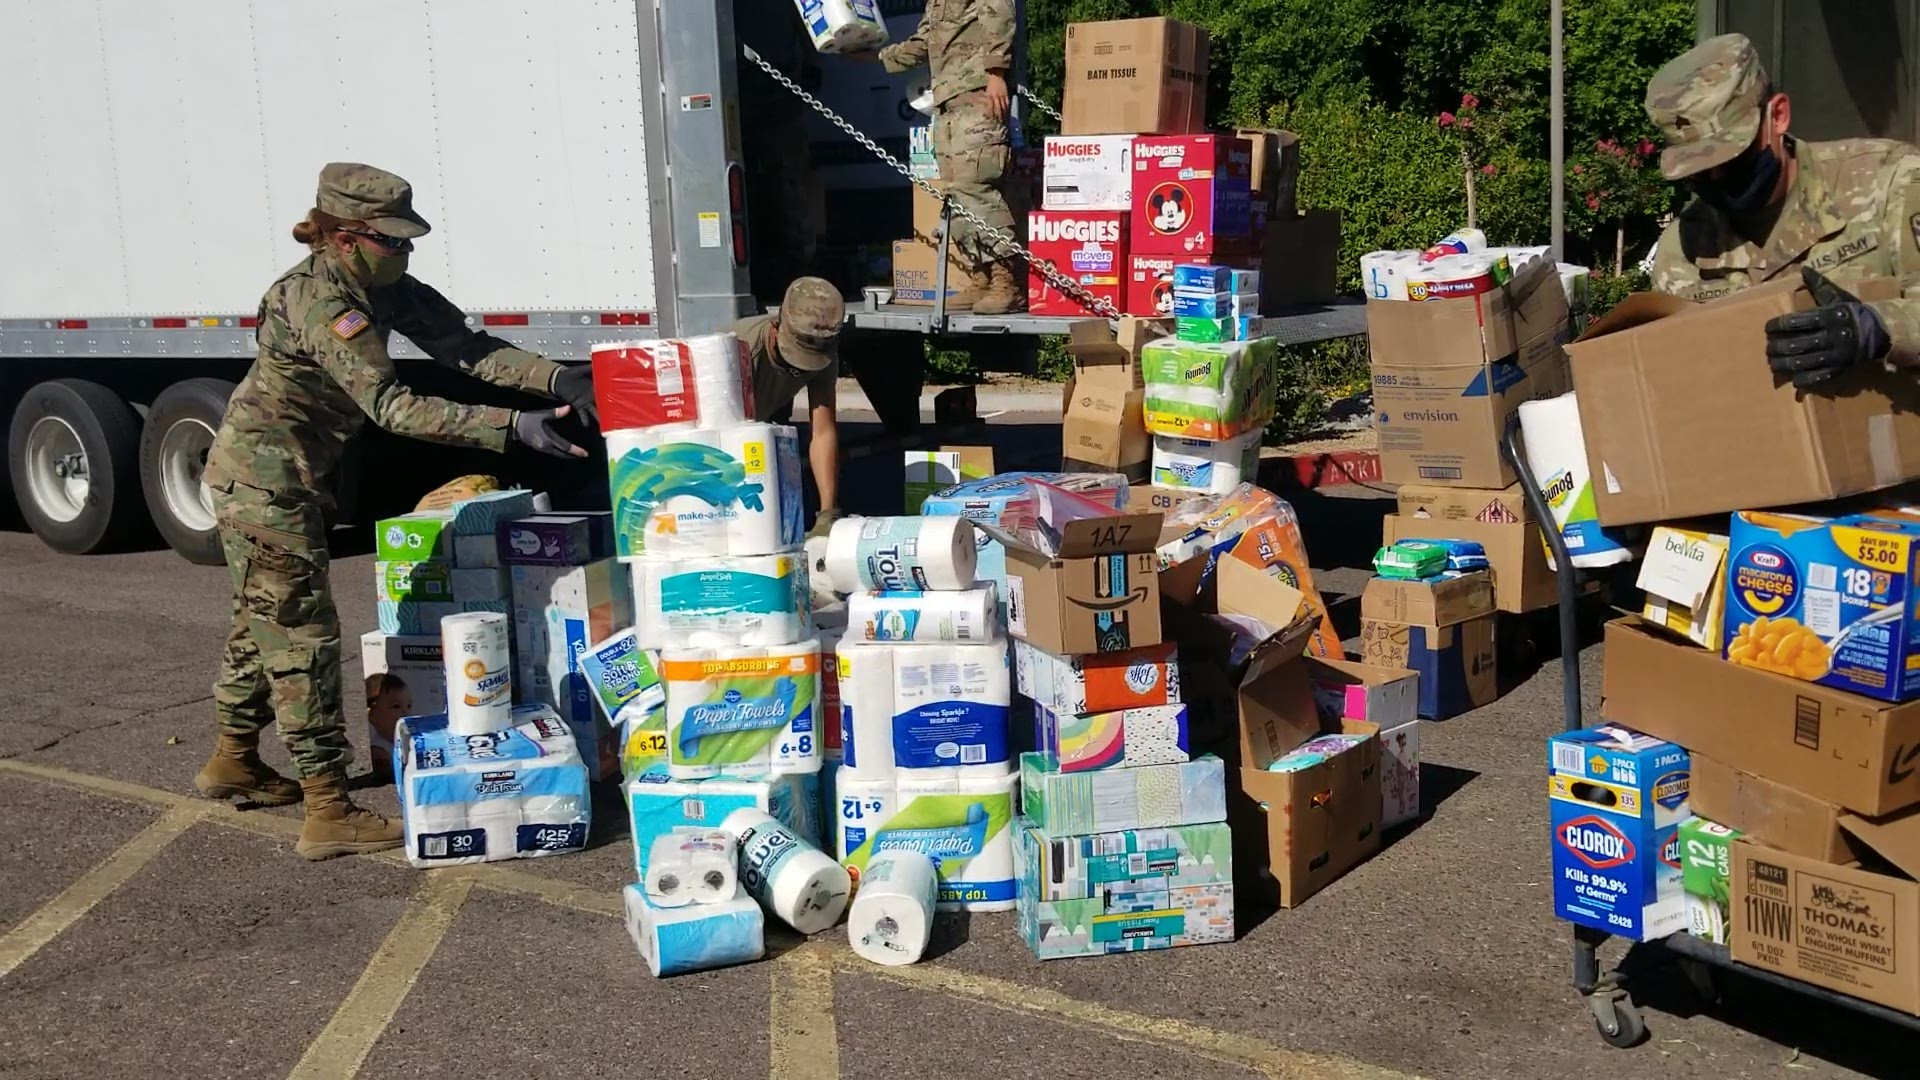 "Today the AZ National Guard came in and gathered the donations to bring them to the Nation," cultural center director Ciara Archer said.